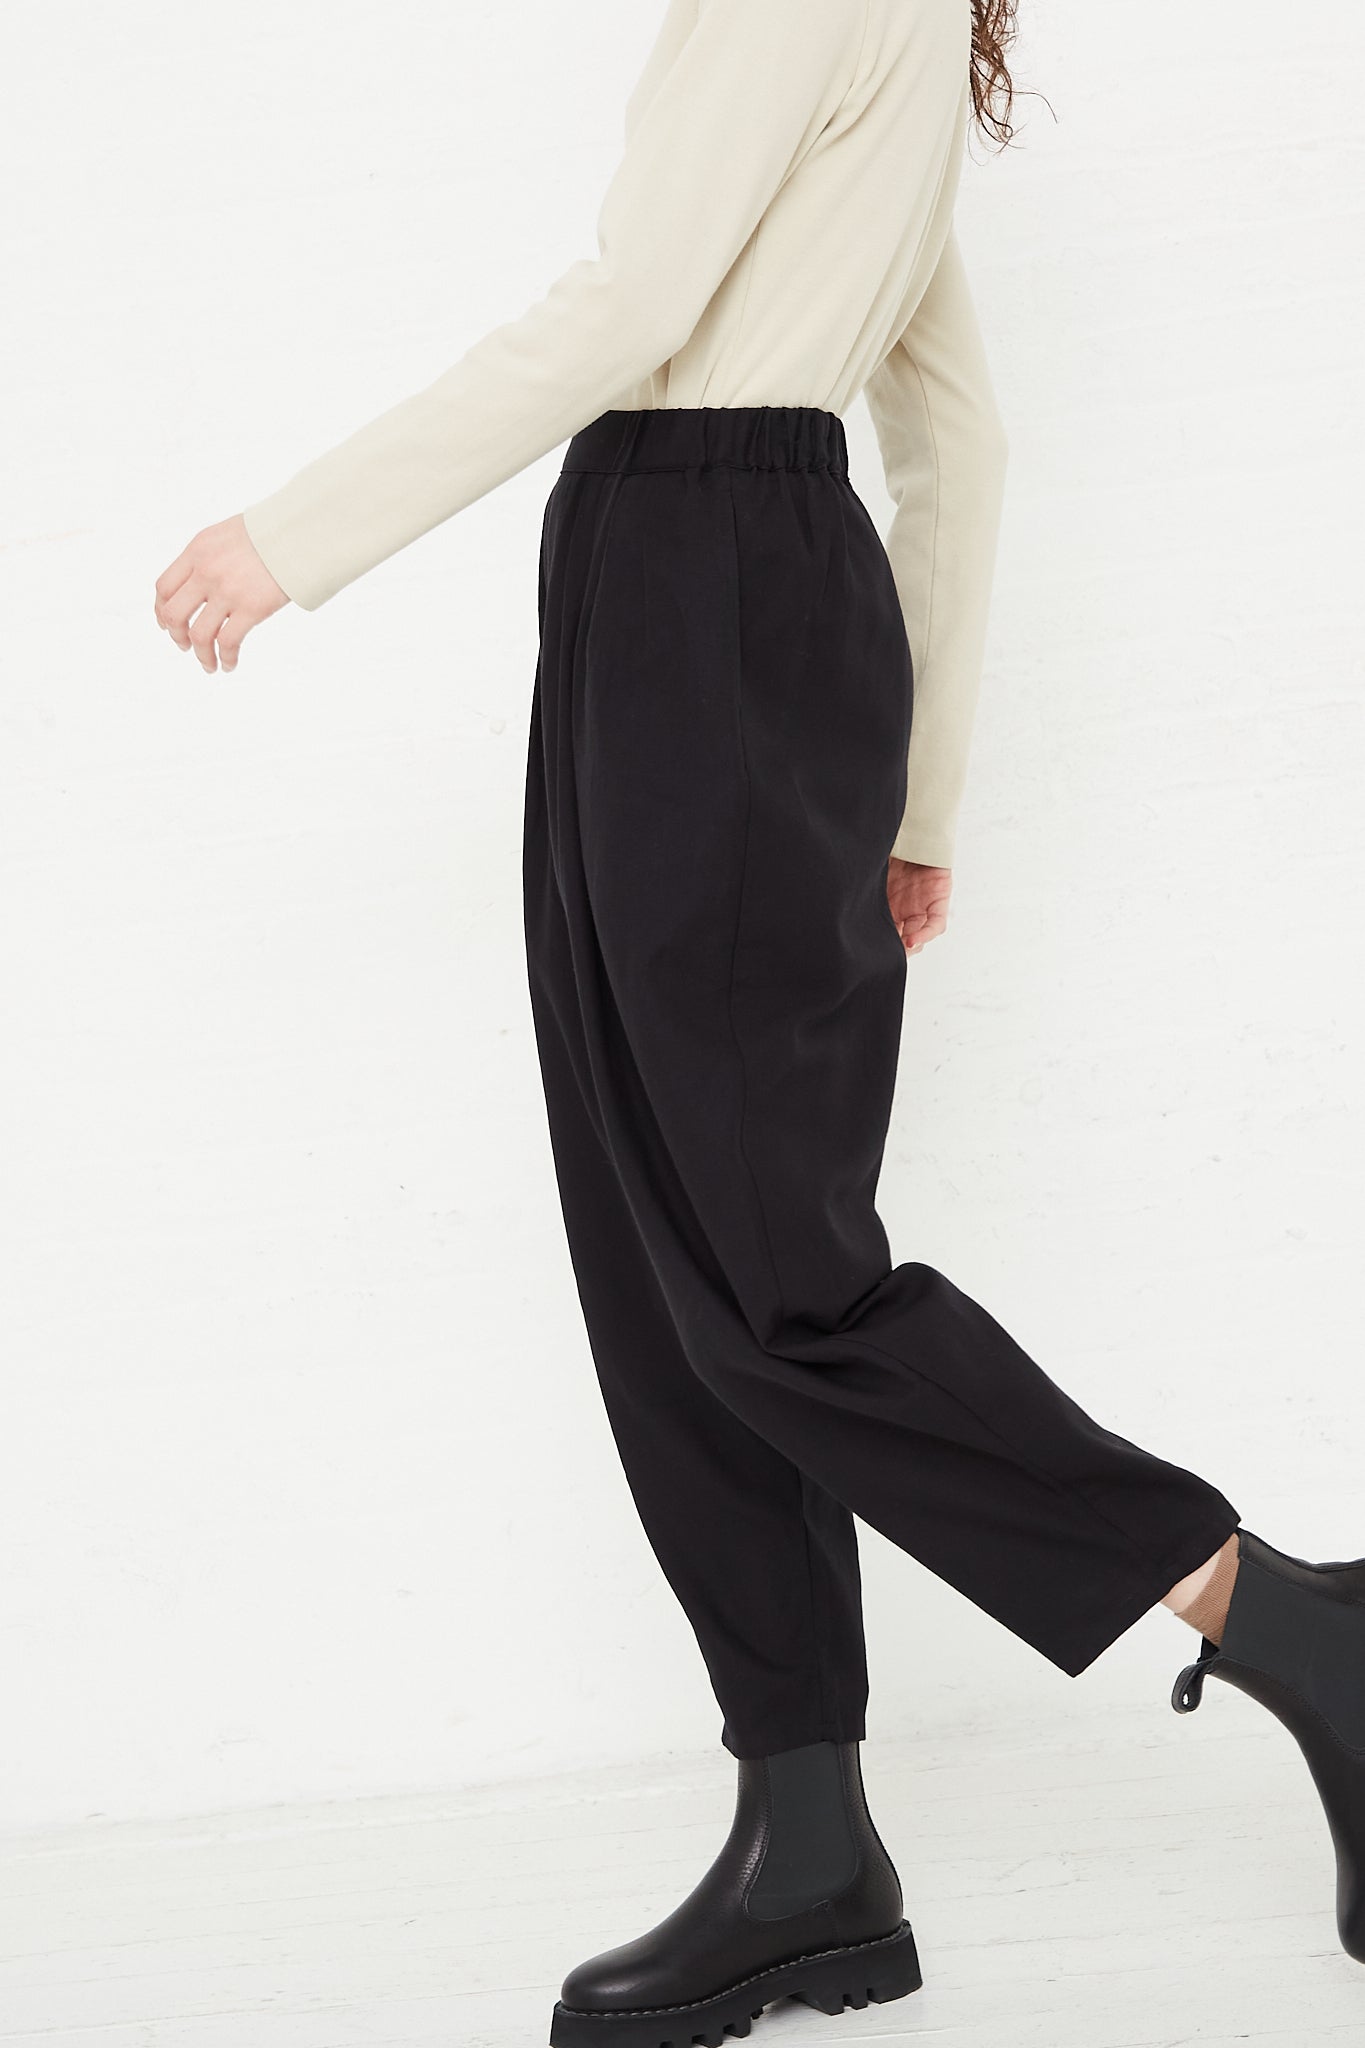 Cotton Twill Draped Pants in Black by Black Crane for Oroboro Side